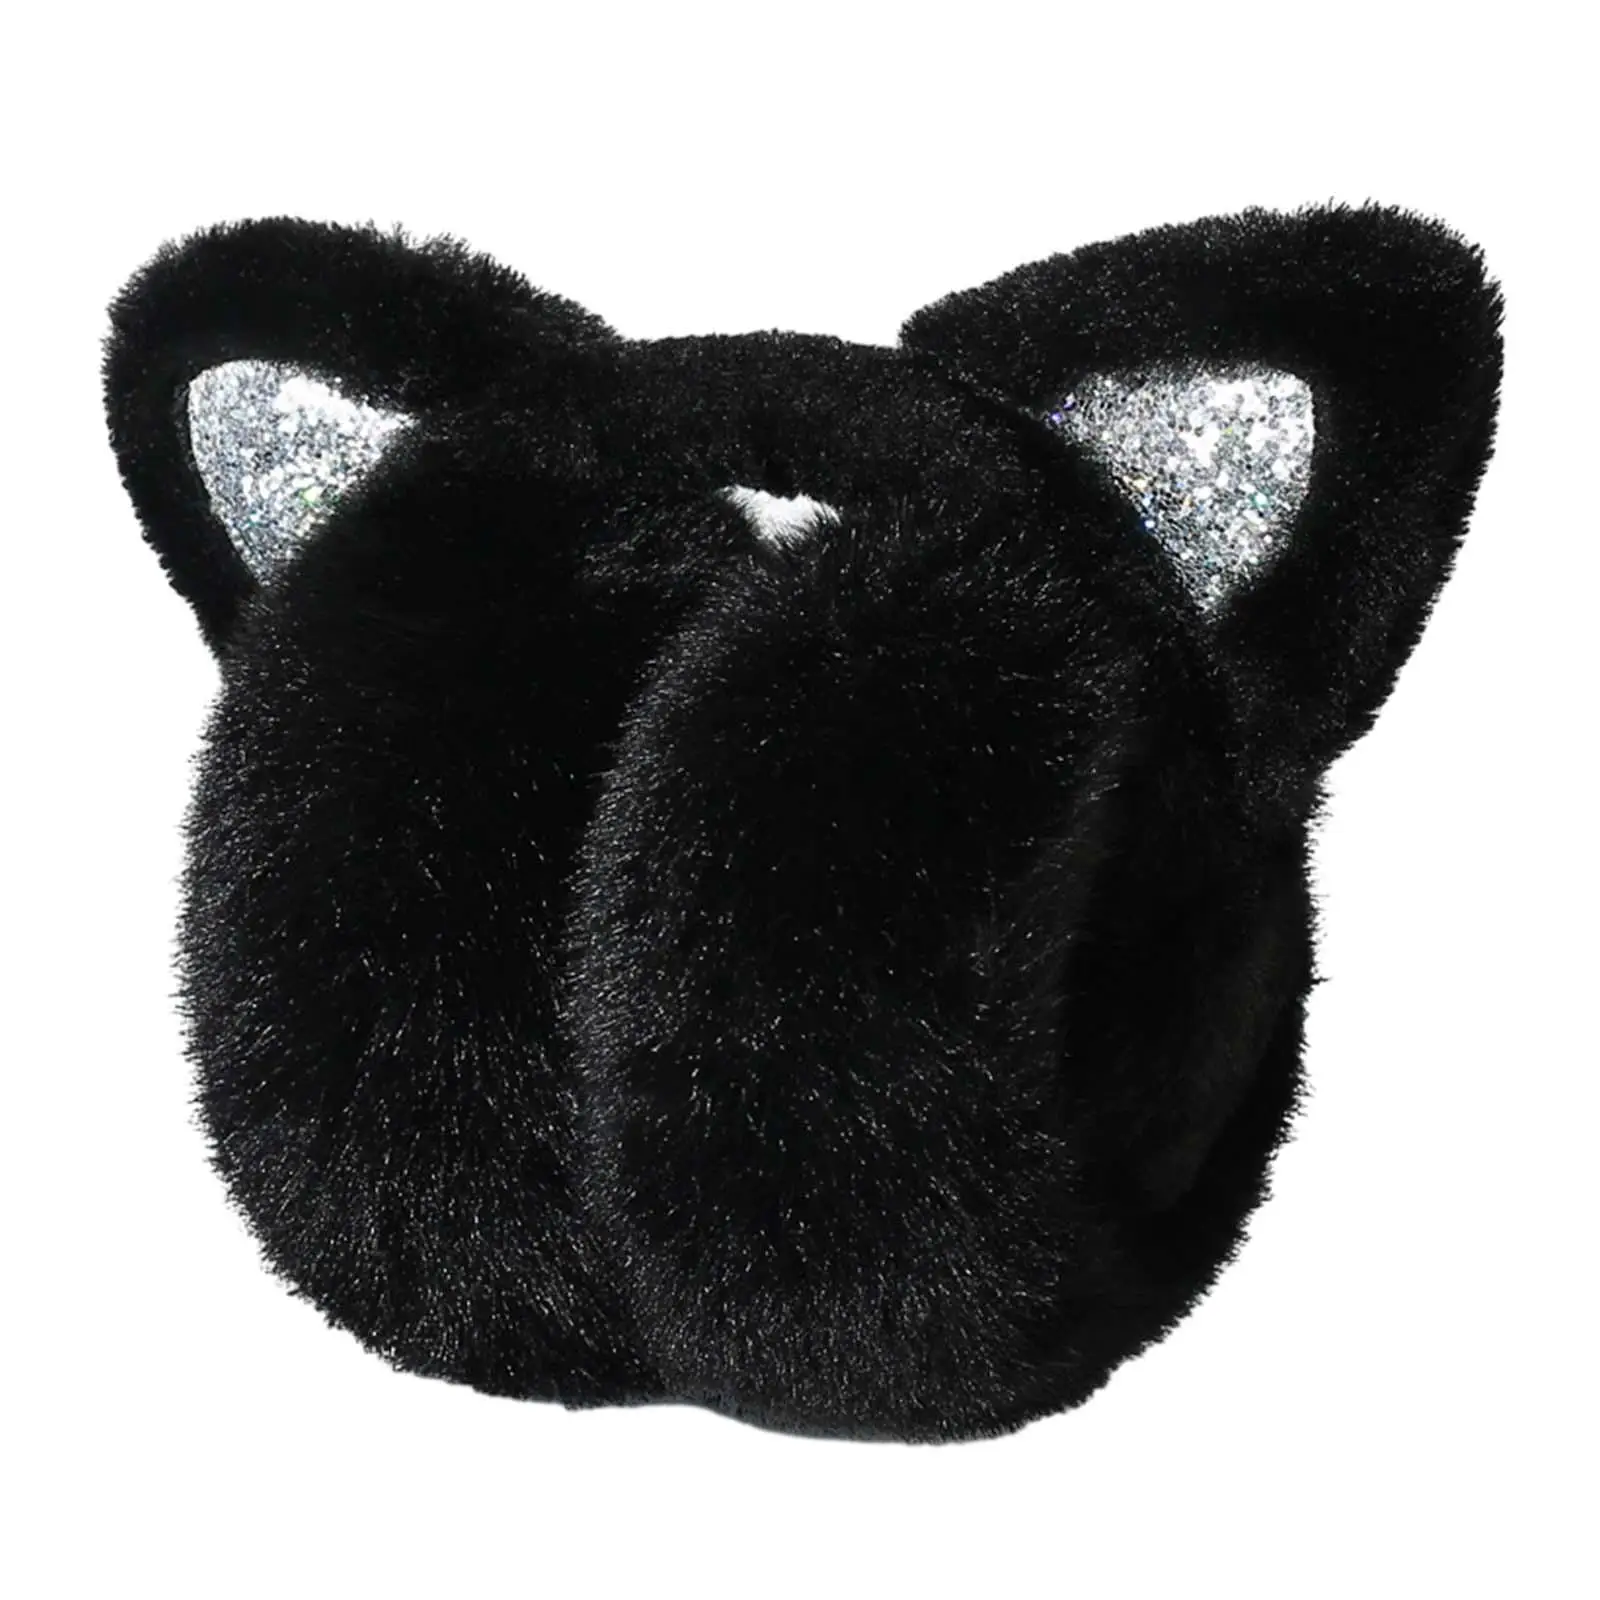 Earmuffs Soft Women Premium Foldable Ear Warmers Winter Ear Muffs Ear Cover for Outdoor Cycling Traveling Skating Cold Weather